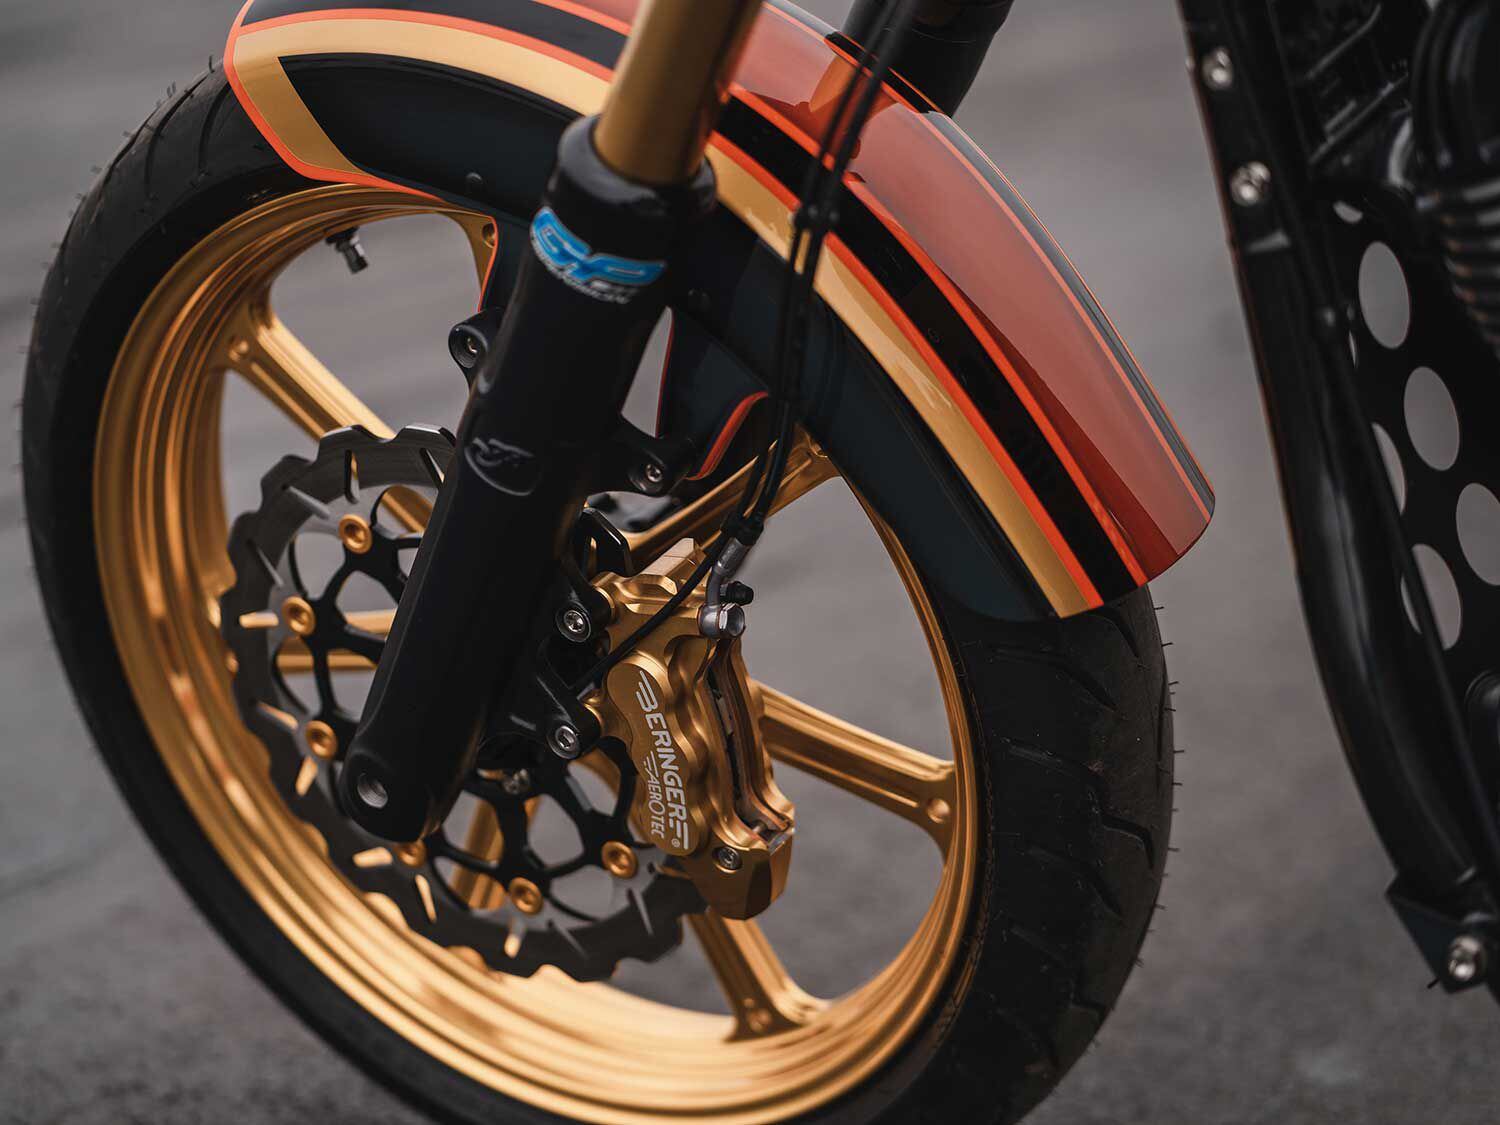 The new copper-finish wheels are from San Diego Customs, and wear new Galfer rotors now clamped by Beringer calipers.